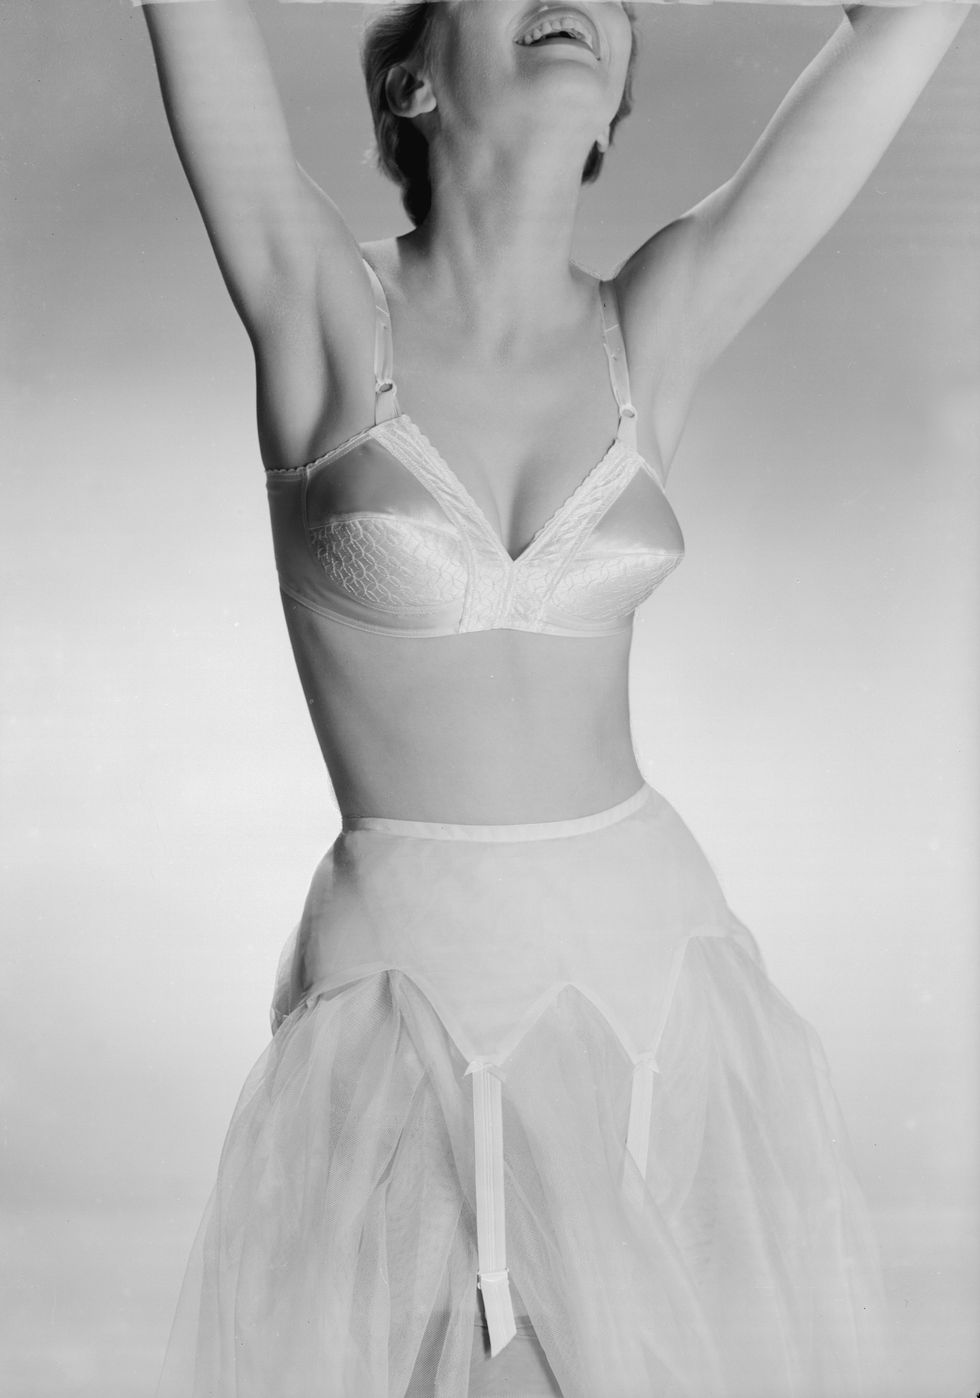 Vintage GOSSARD BRA & GIRDLE - 3 Sexy Young Women in Lingerie